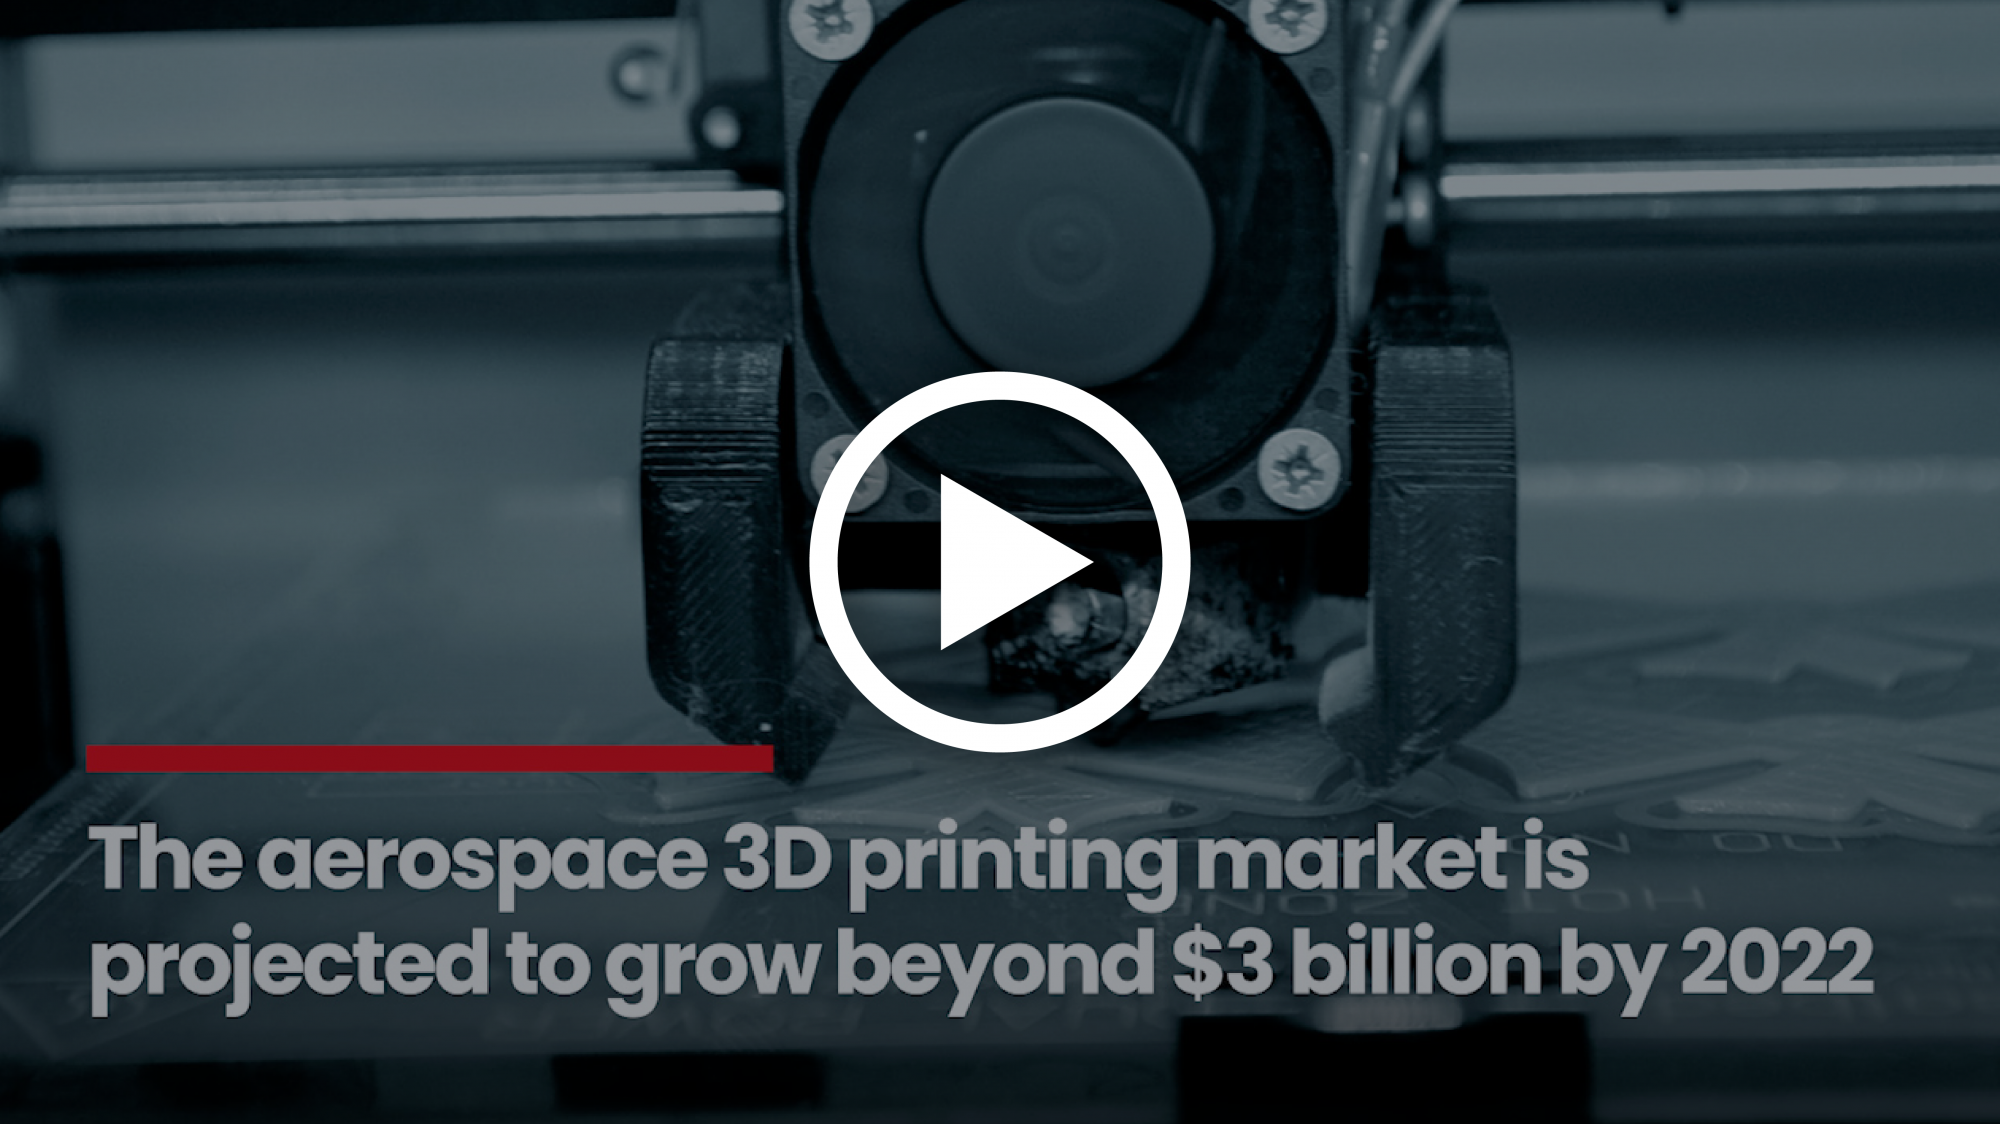 3D printing takes aerospace to new heights